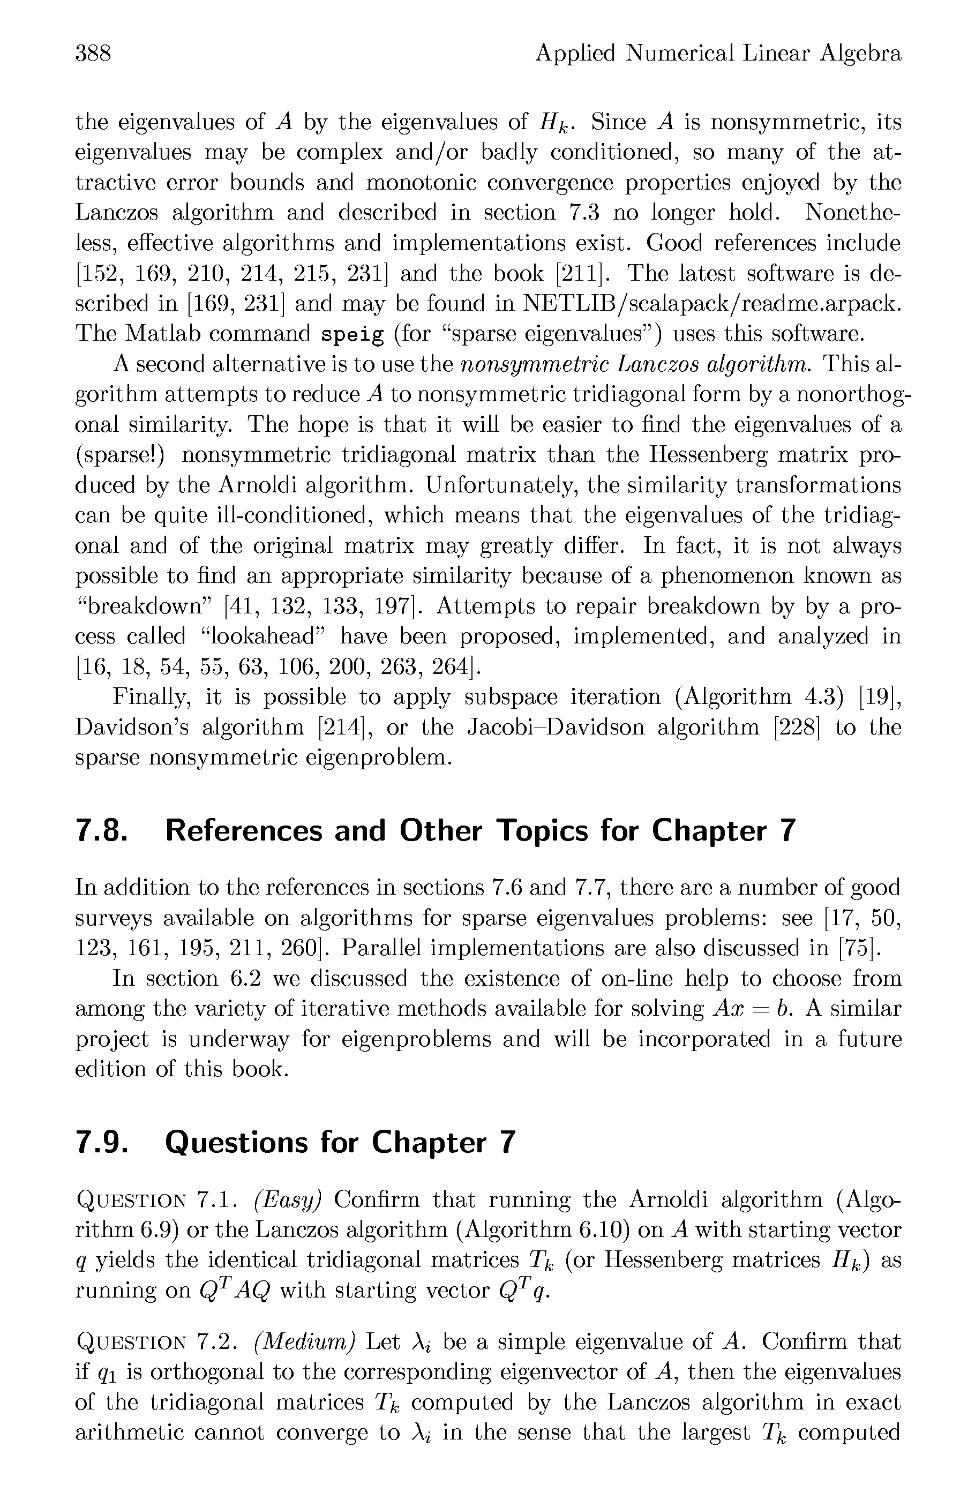 7.8 References and Other Topics for Chapter 7
7.9 Questions for Chapter 7